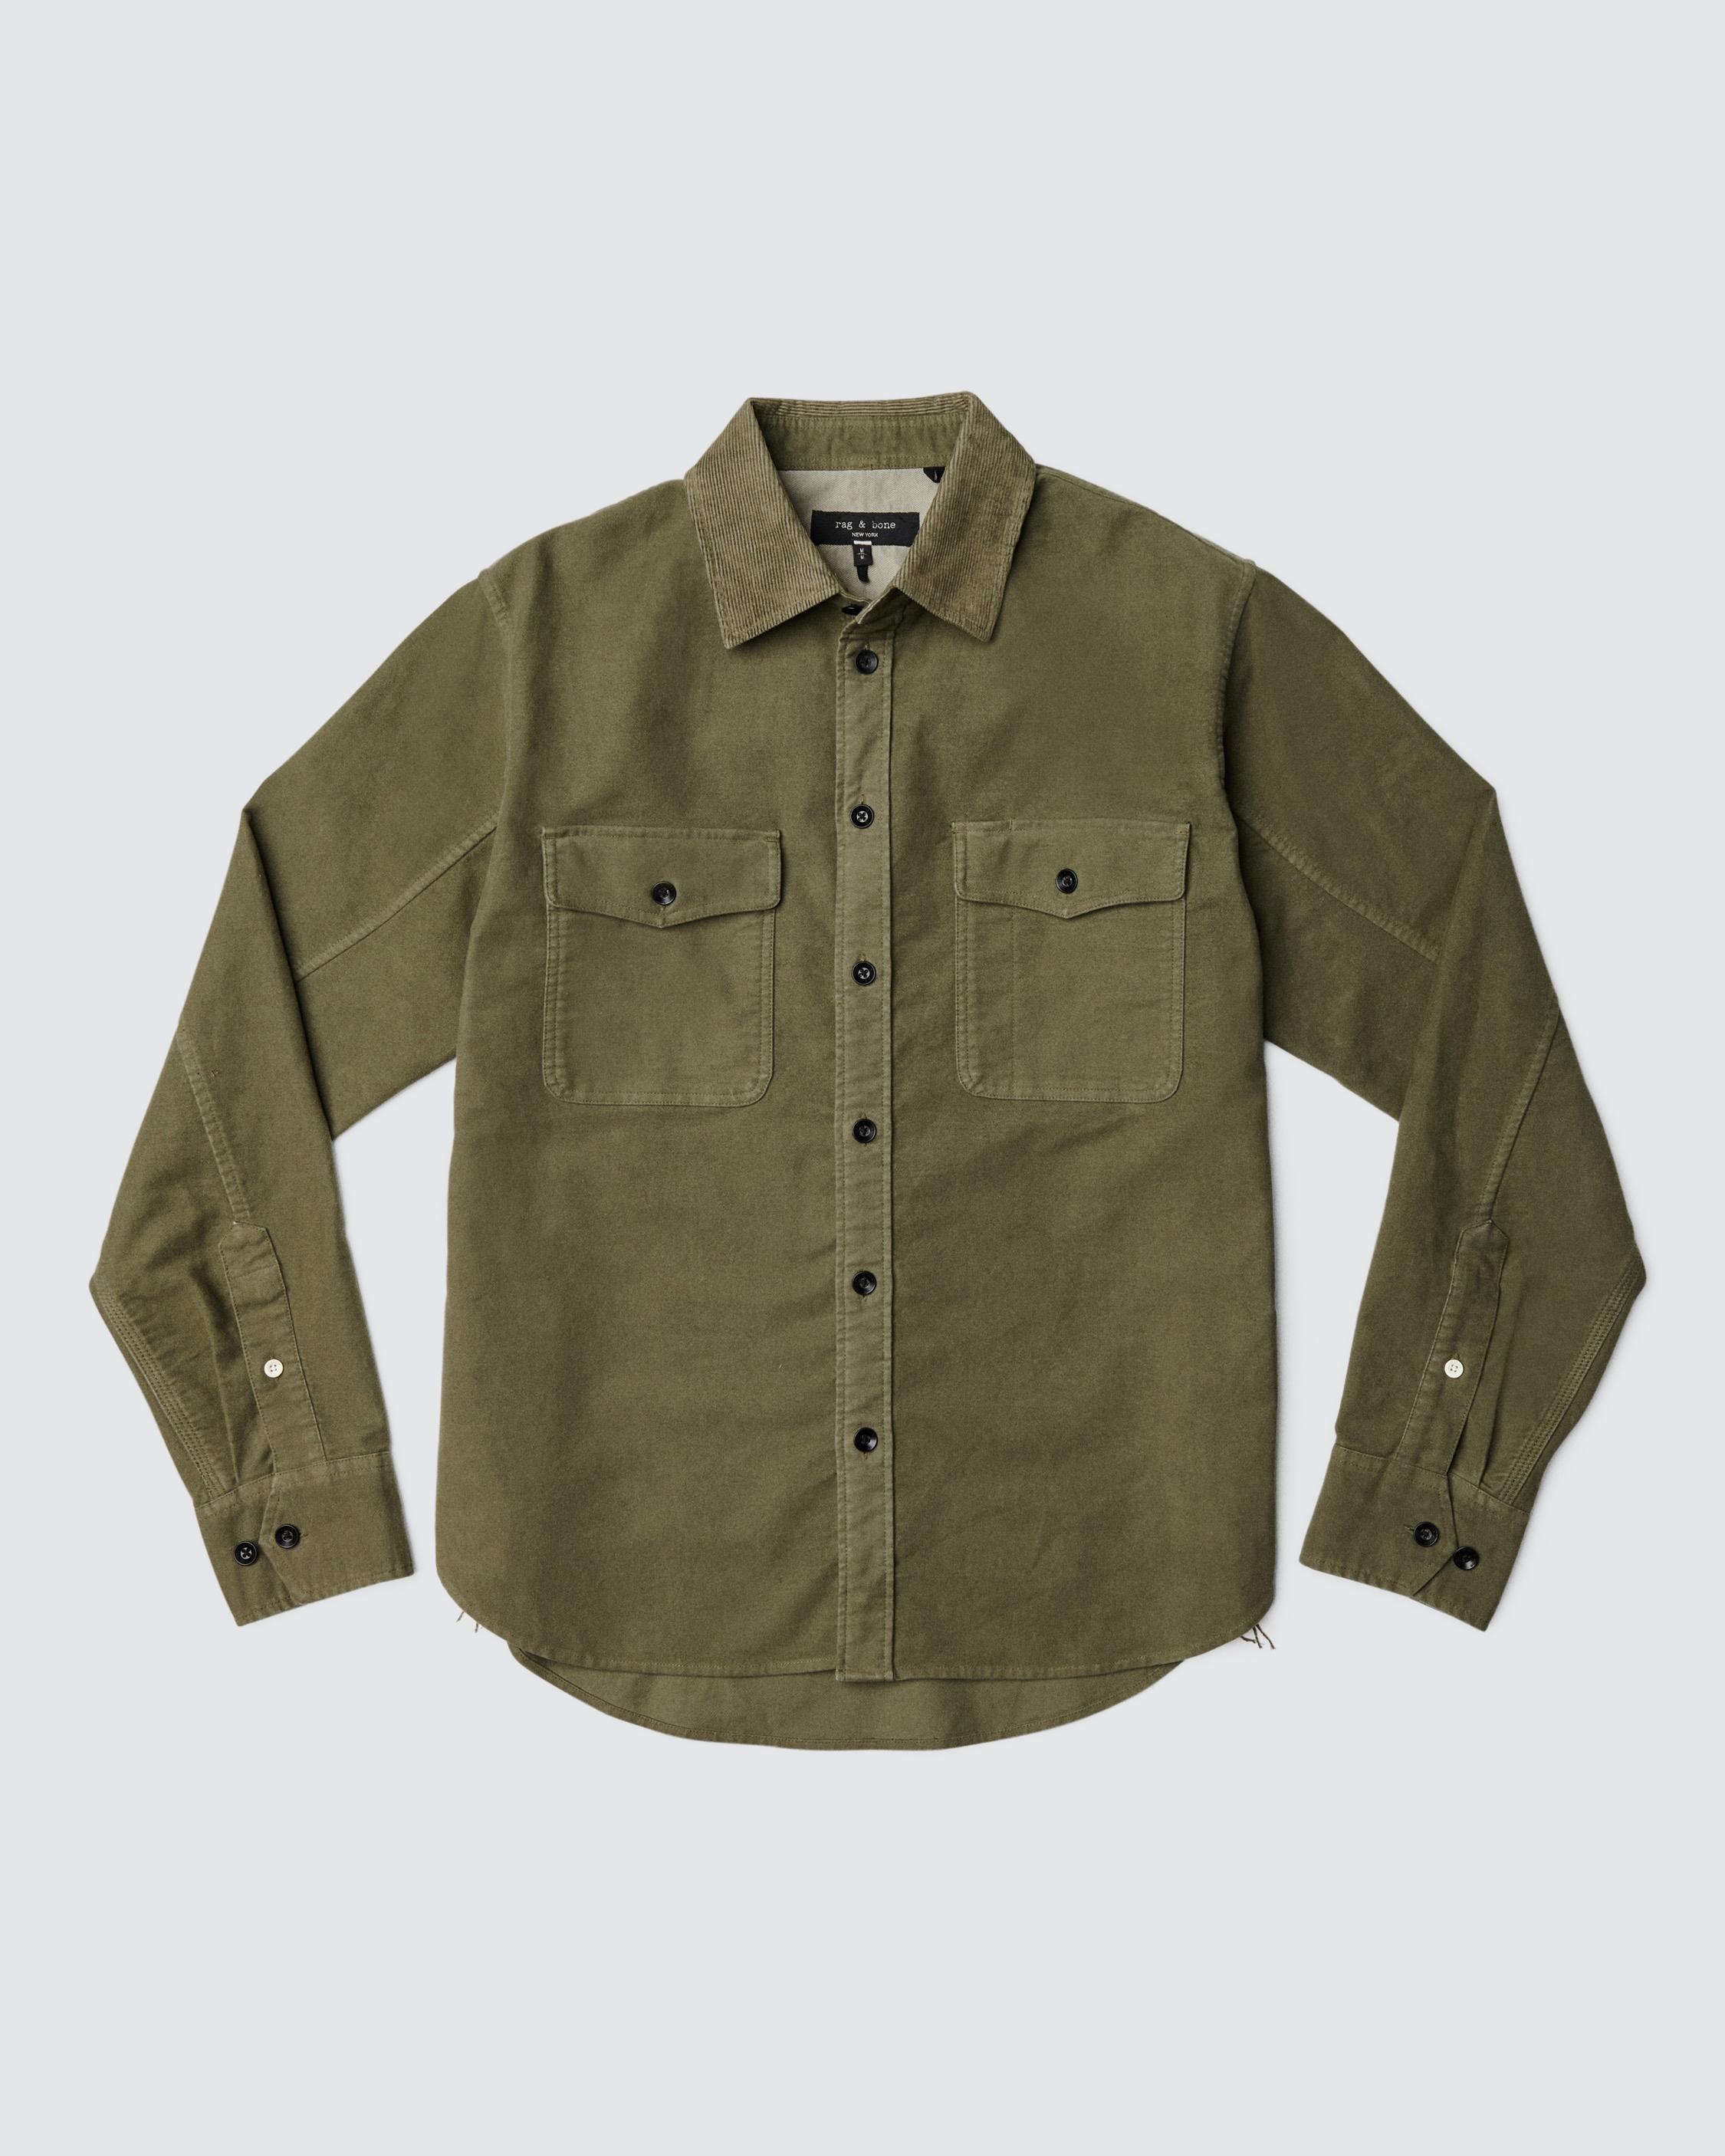 Engineered Moleskin Jack Shirt
Relaxed Fit Button Down - 1